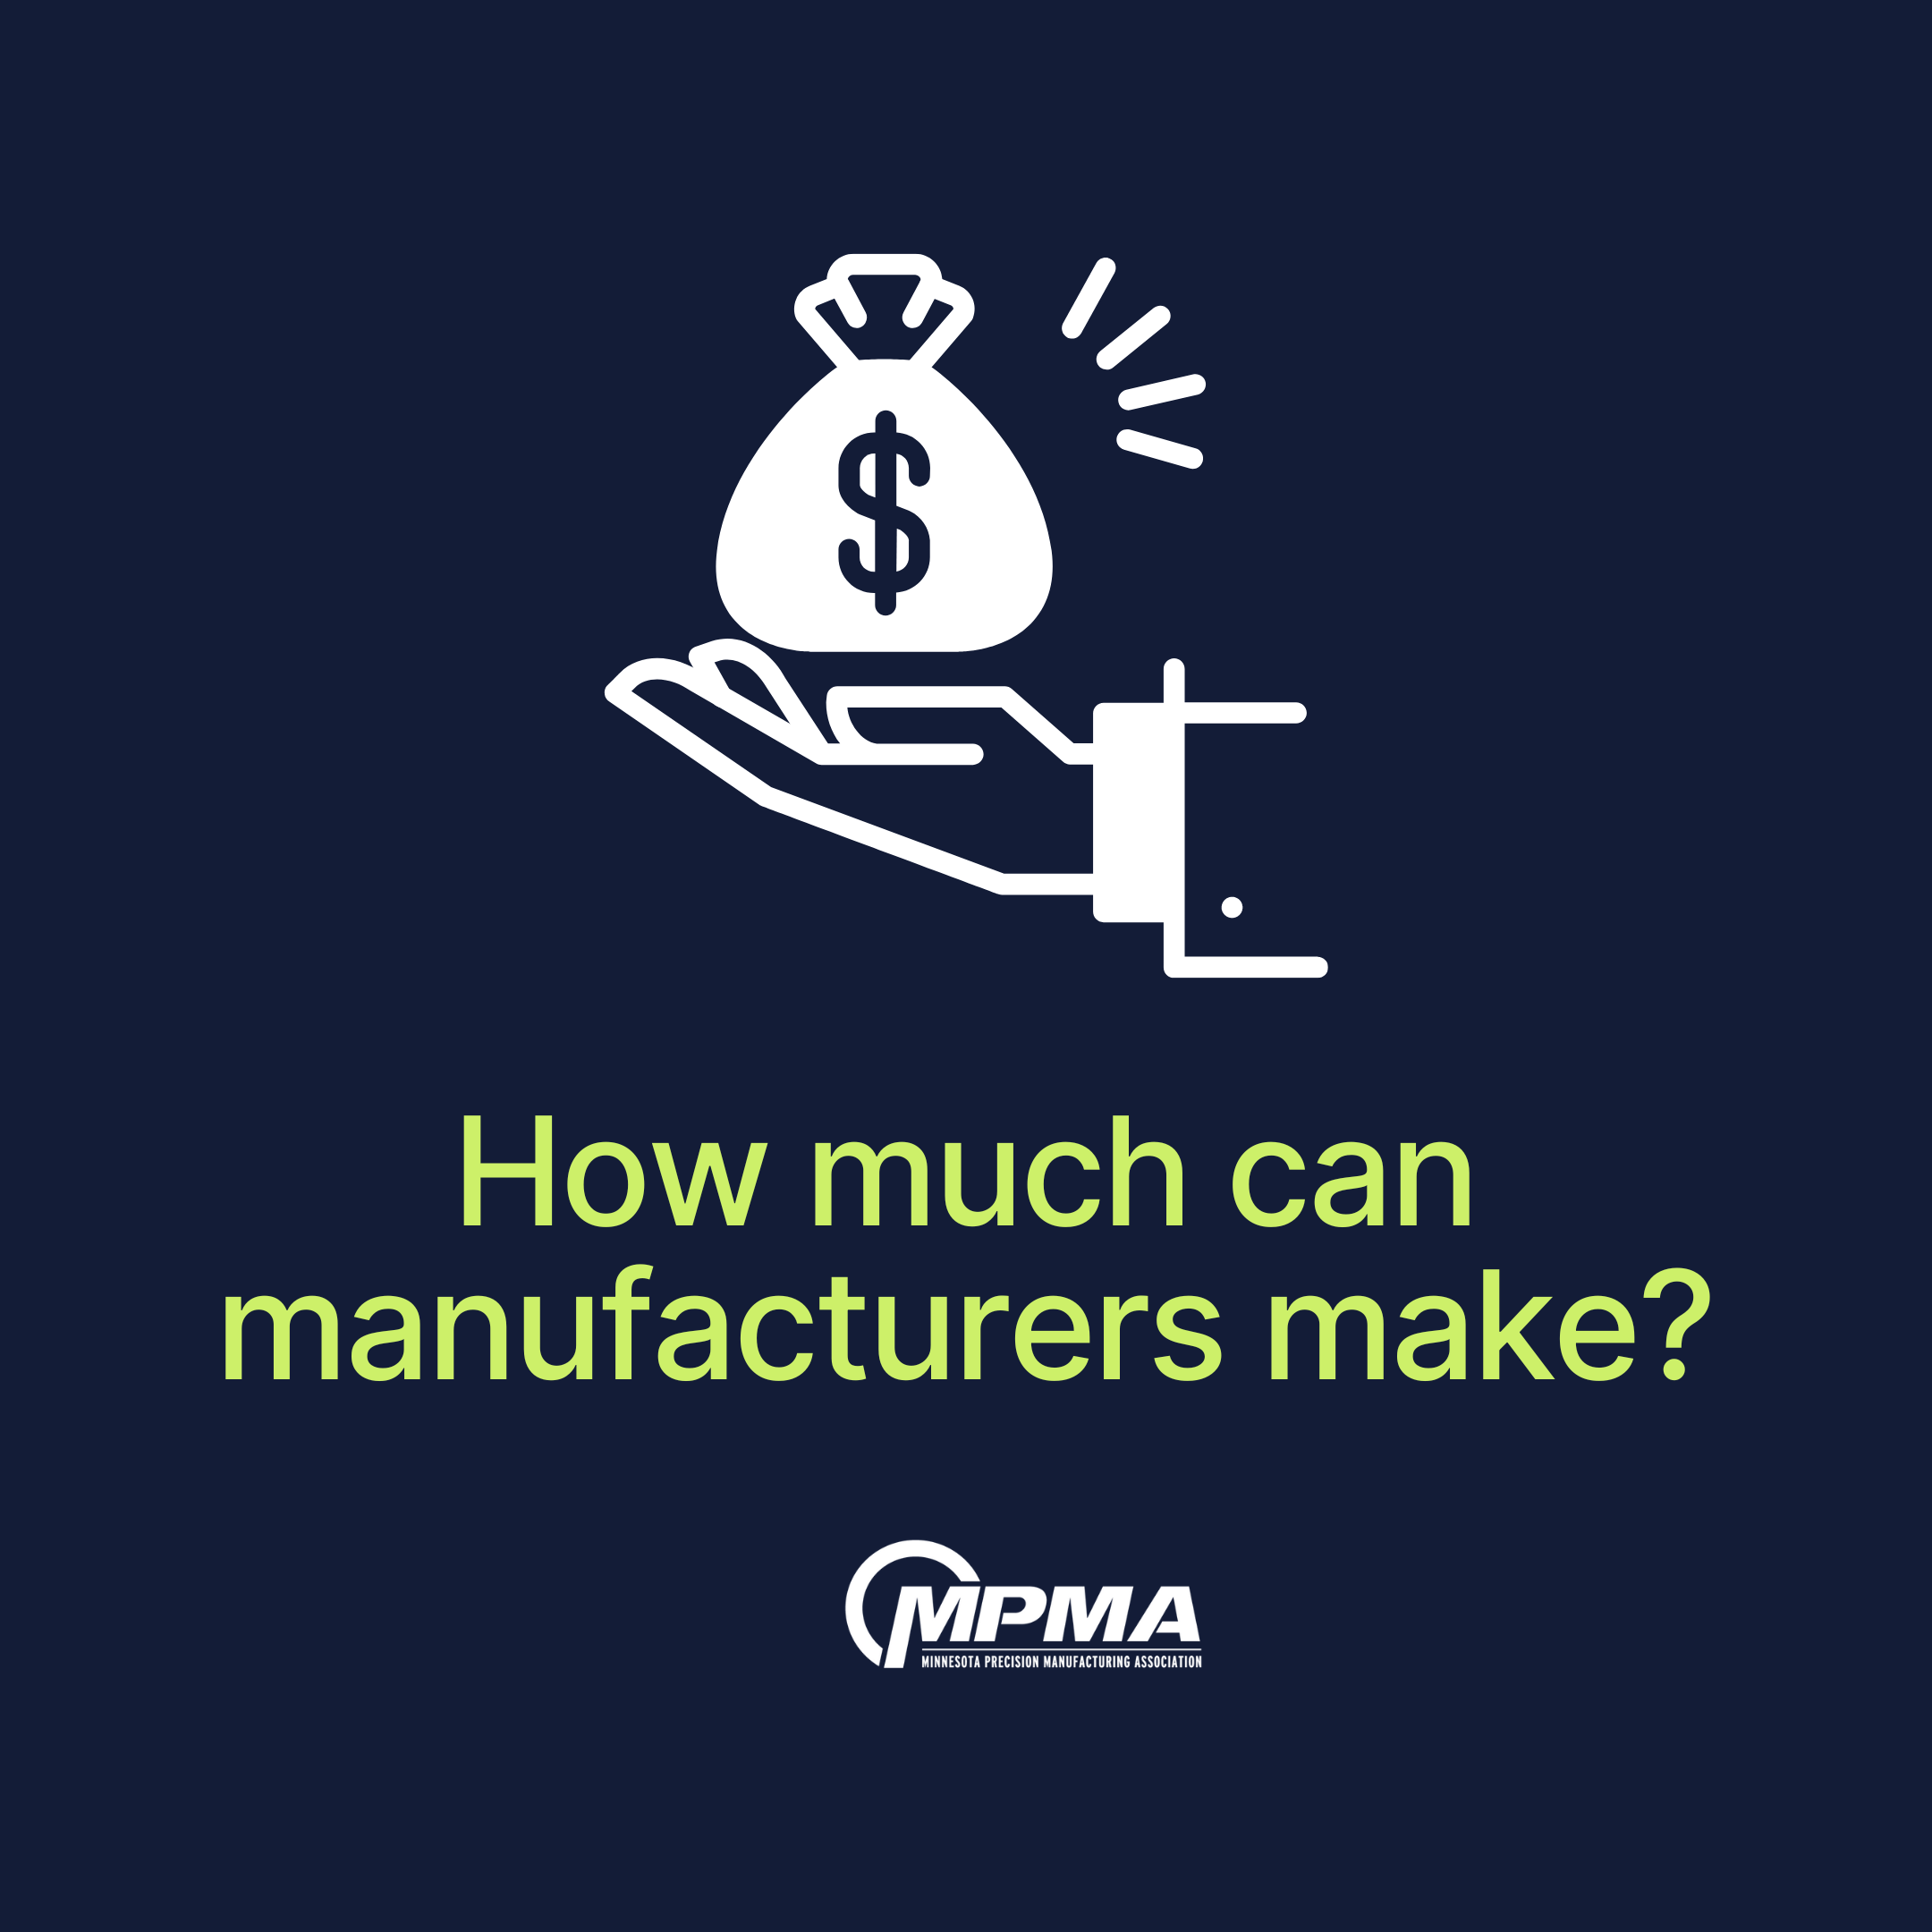 How much can manufacturers make?